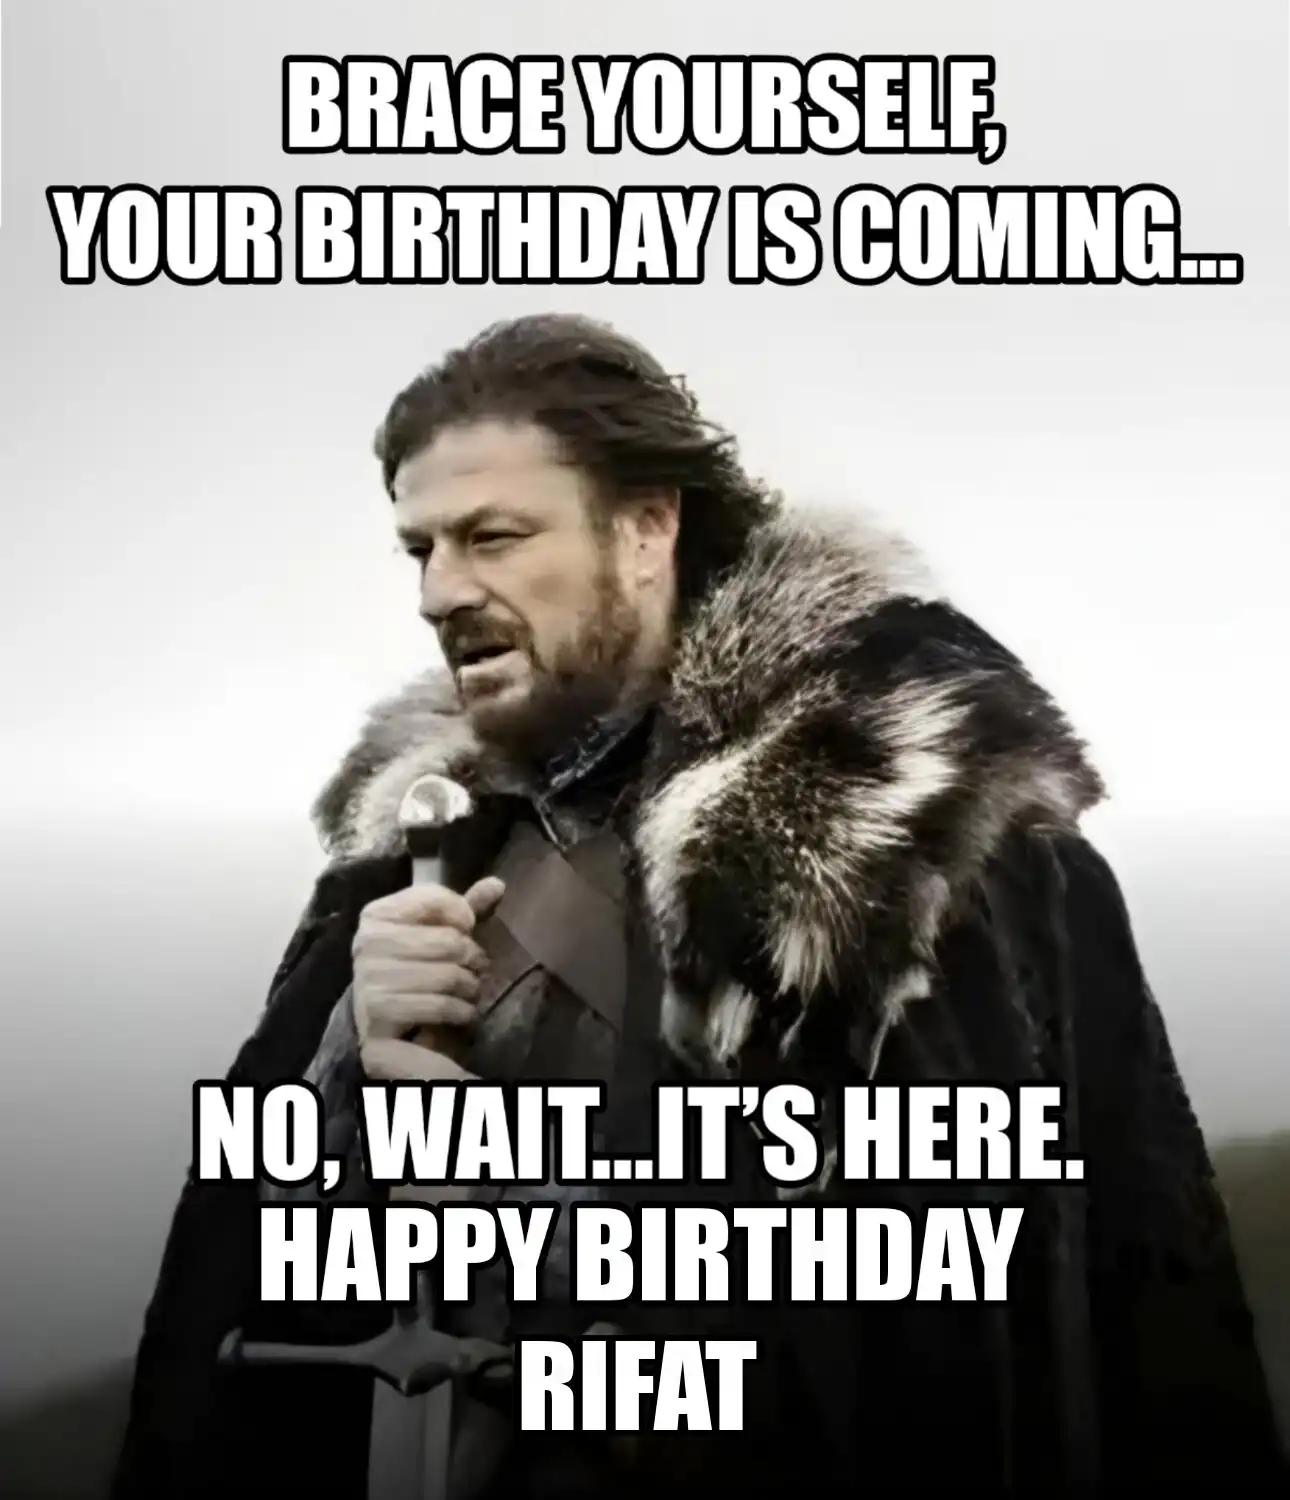 Happy Birthday Rifat Brace Yourself Your Birthday Is Coming Meme